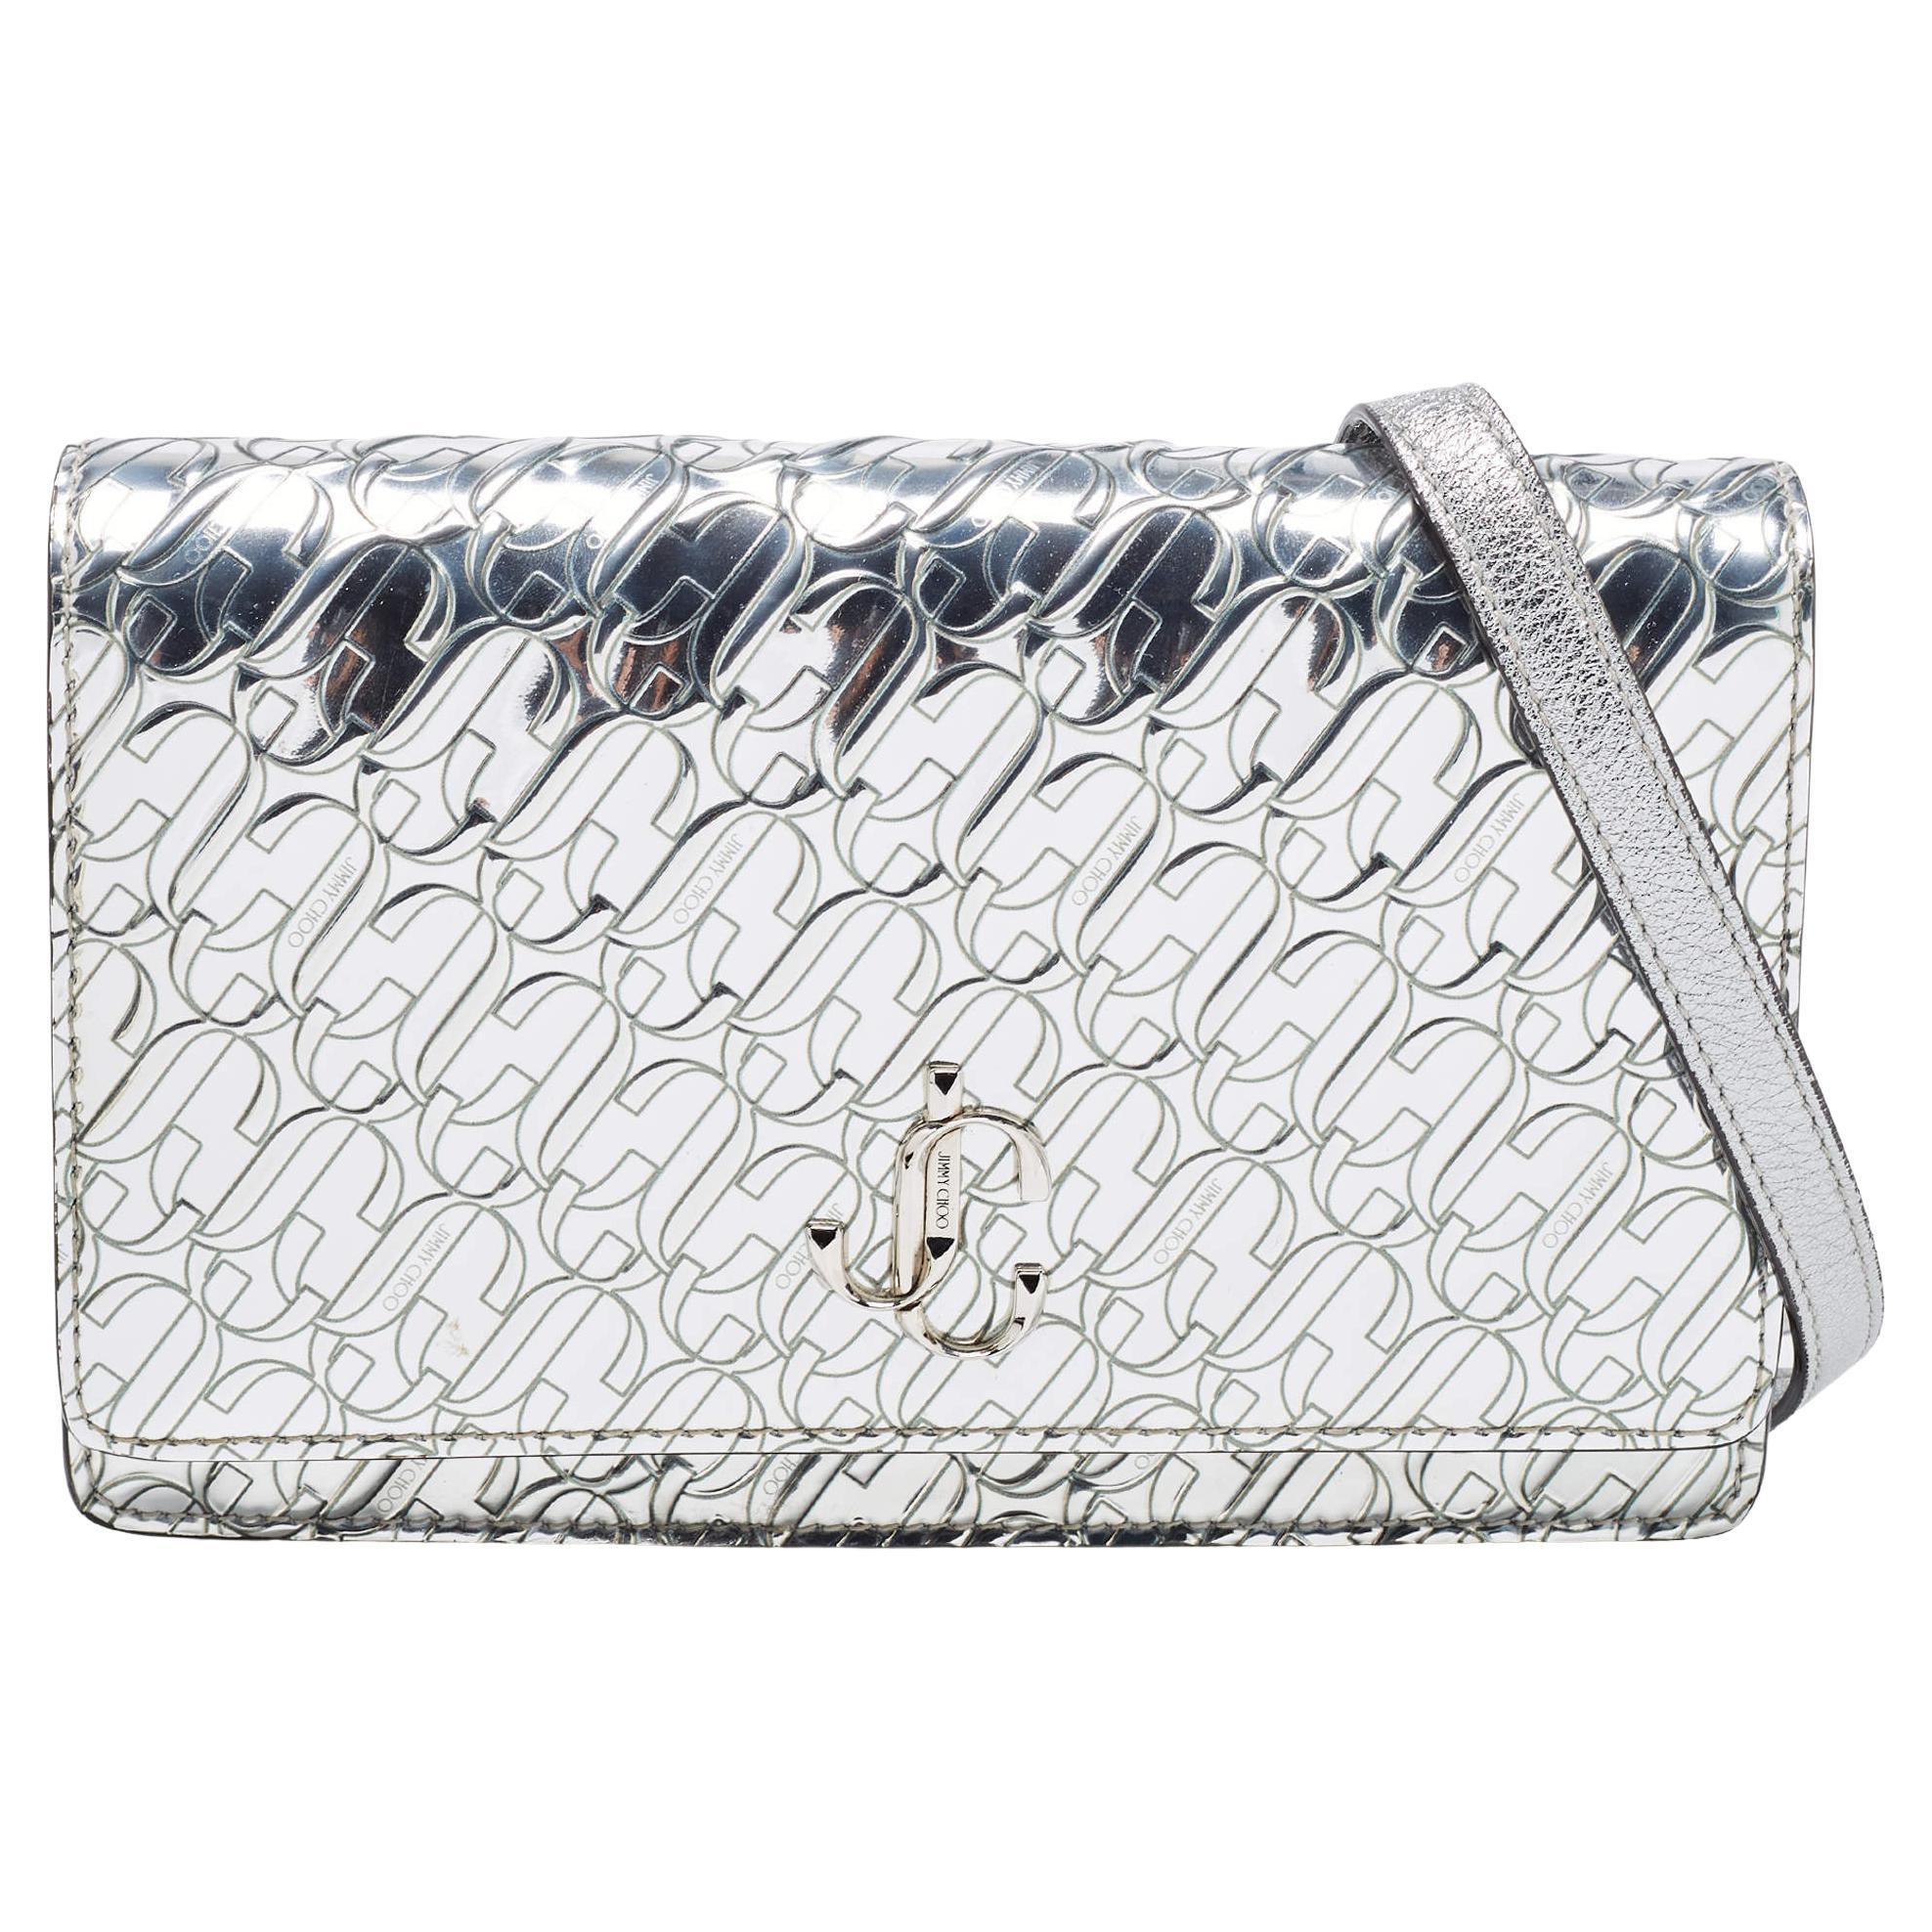 Jimmy Choo JC Embossed Patent Leather Palace Clutch Bag